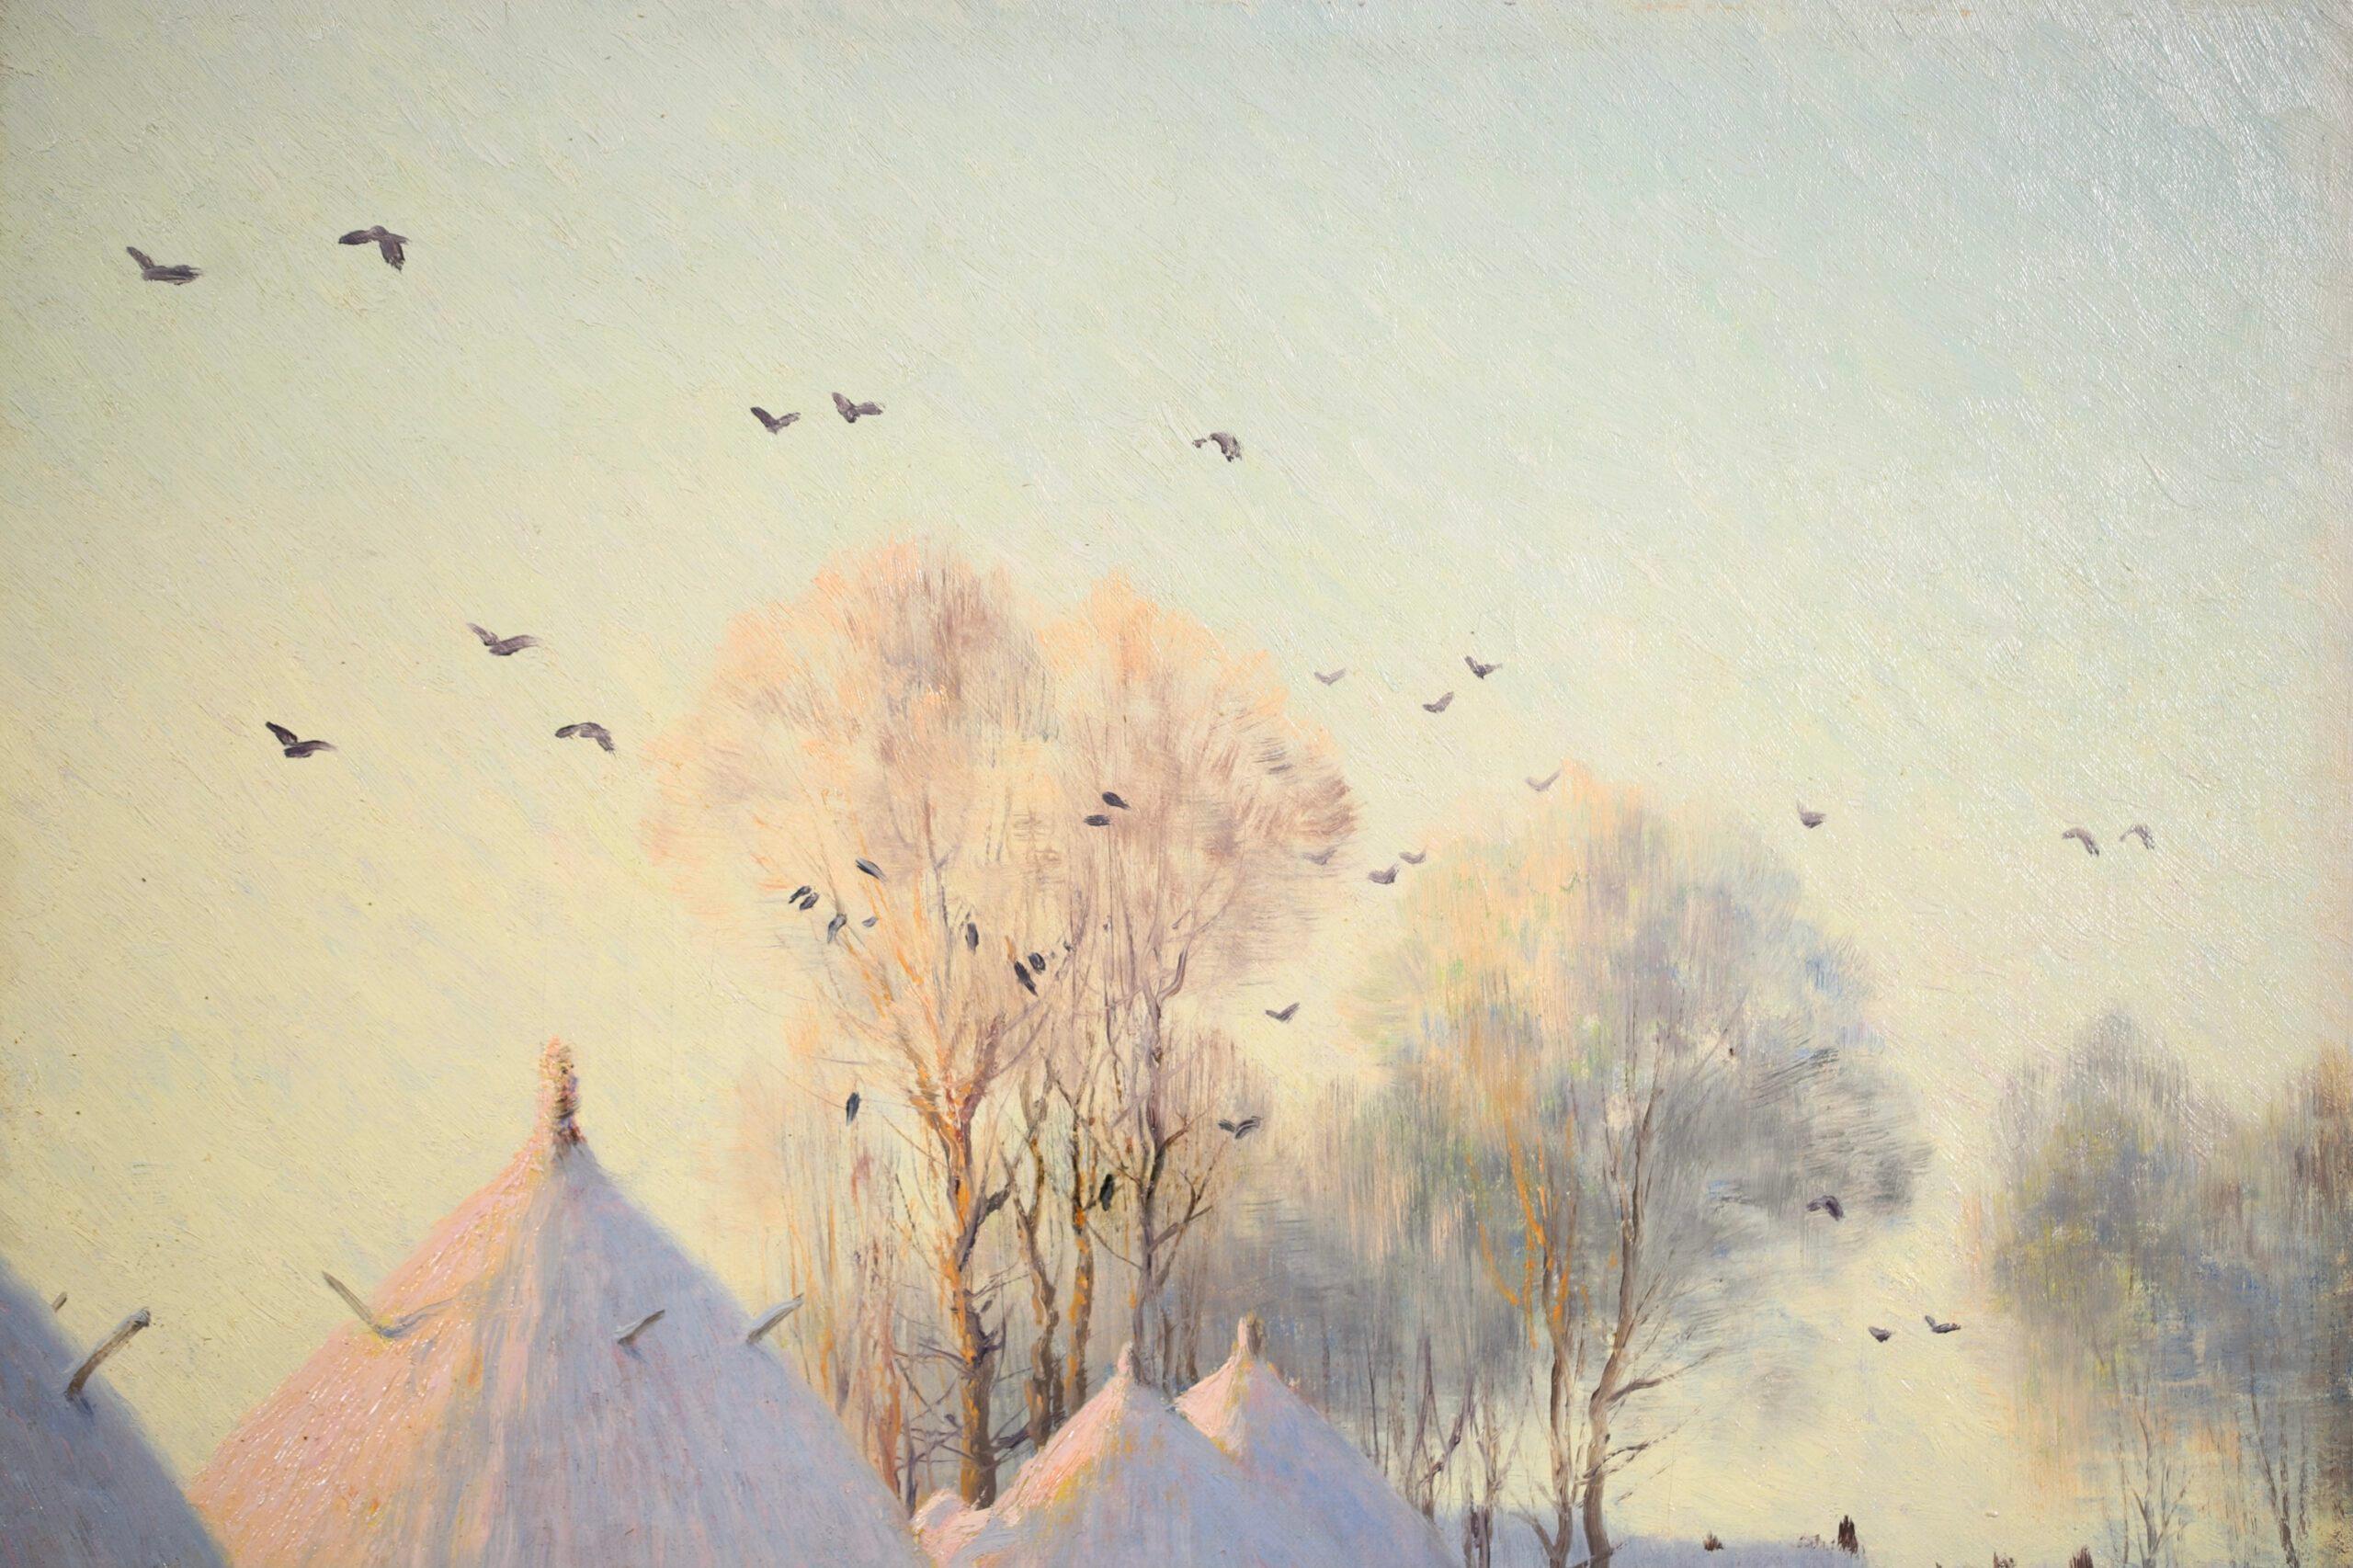 Signed and dated impressionist oil on canvas landscape by French painter Armand Guery. The work depicts a rural winter scene with snow covered haystacks to the left and the trees and snowy rooftops of the nearby village in the distance. Birds fly